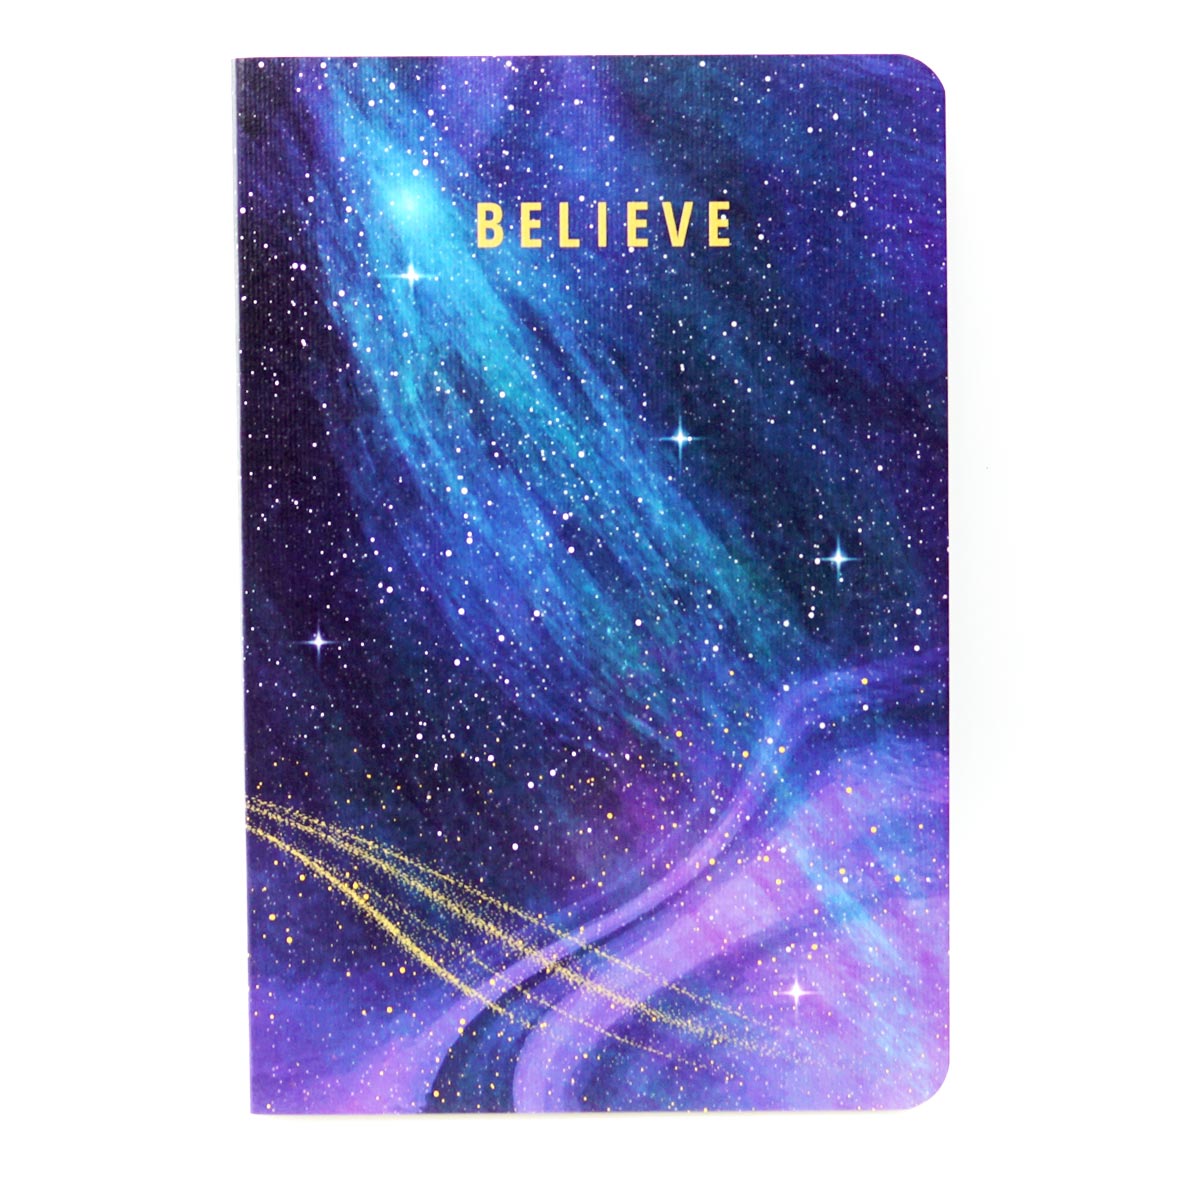 Factor A5 Multi Color with Milky Way Design Soft Bound Ruled Notebook 90 GSM With 160 Pages SKU 50223